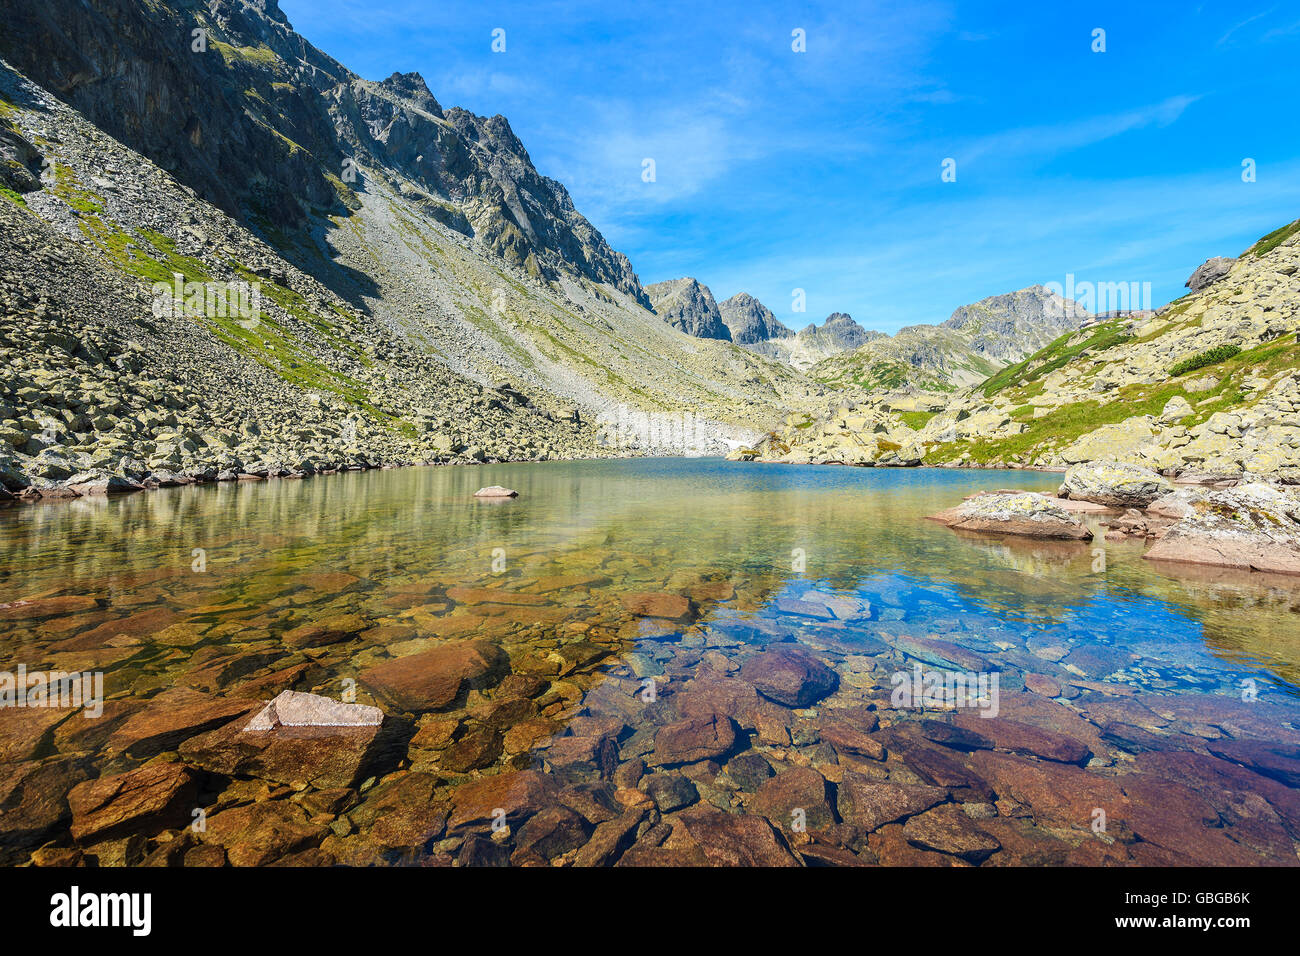 Stones in crystal clear water of alpine lake in summer landscape of Starolesna valley, High Tatra Mountains, Slovakia Stock Photo